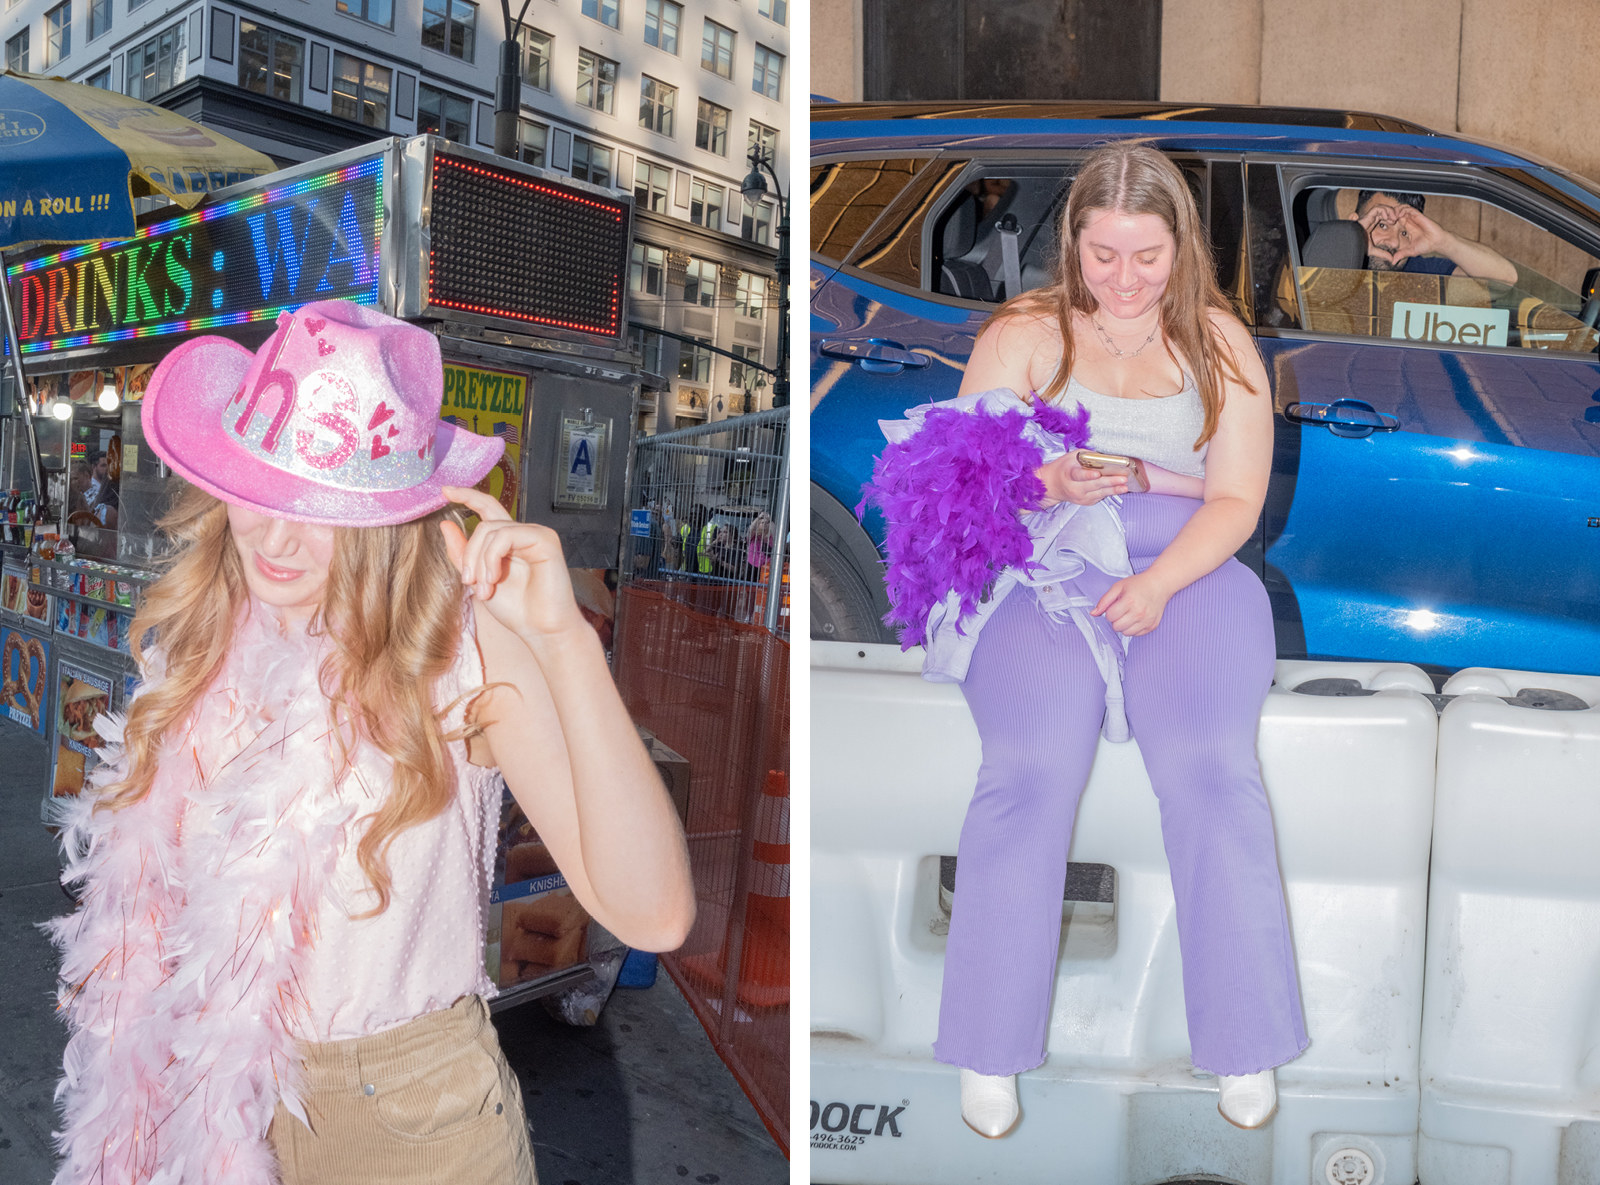 Two images: A woman shows her pink cowboy hat with &quot;HS&quot; written on it. Another woman sits on a plastic road barrier while a cab driver makes a heart sign with his hands at the camera